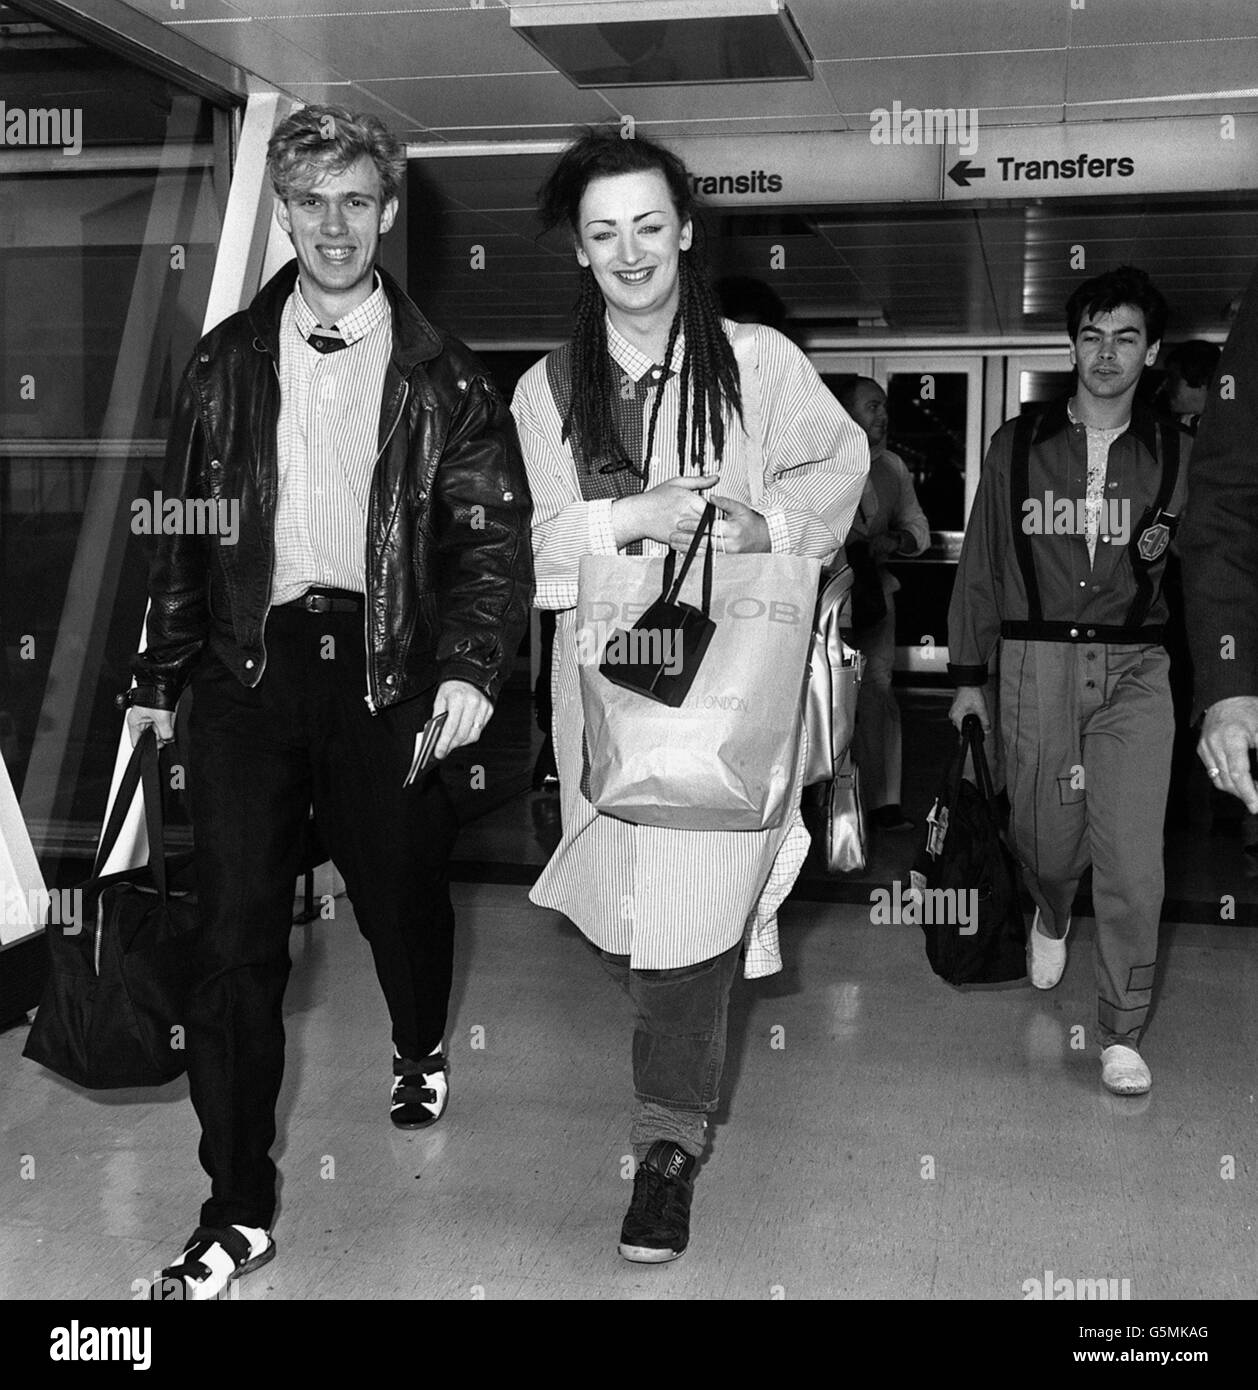 Pop singer Boy George leaves Heathrow Airport London for a promotional trip to the United States. He left for New York on Concorde. Stock Photo